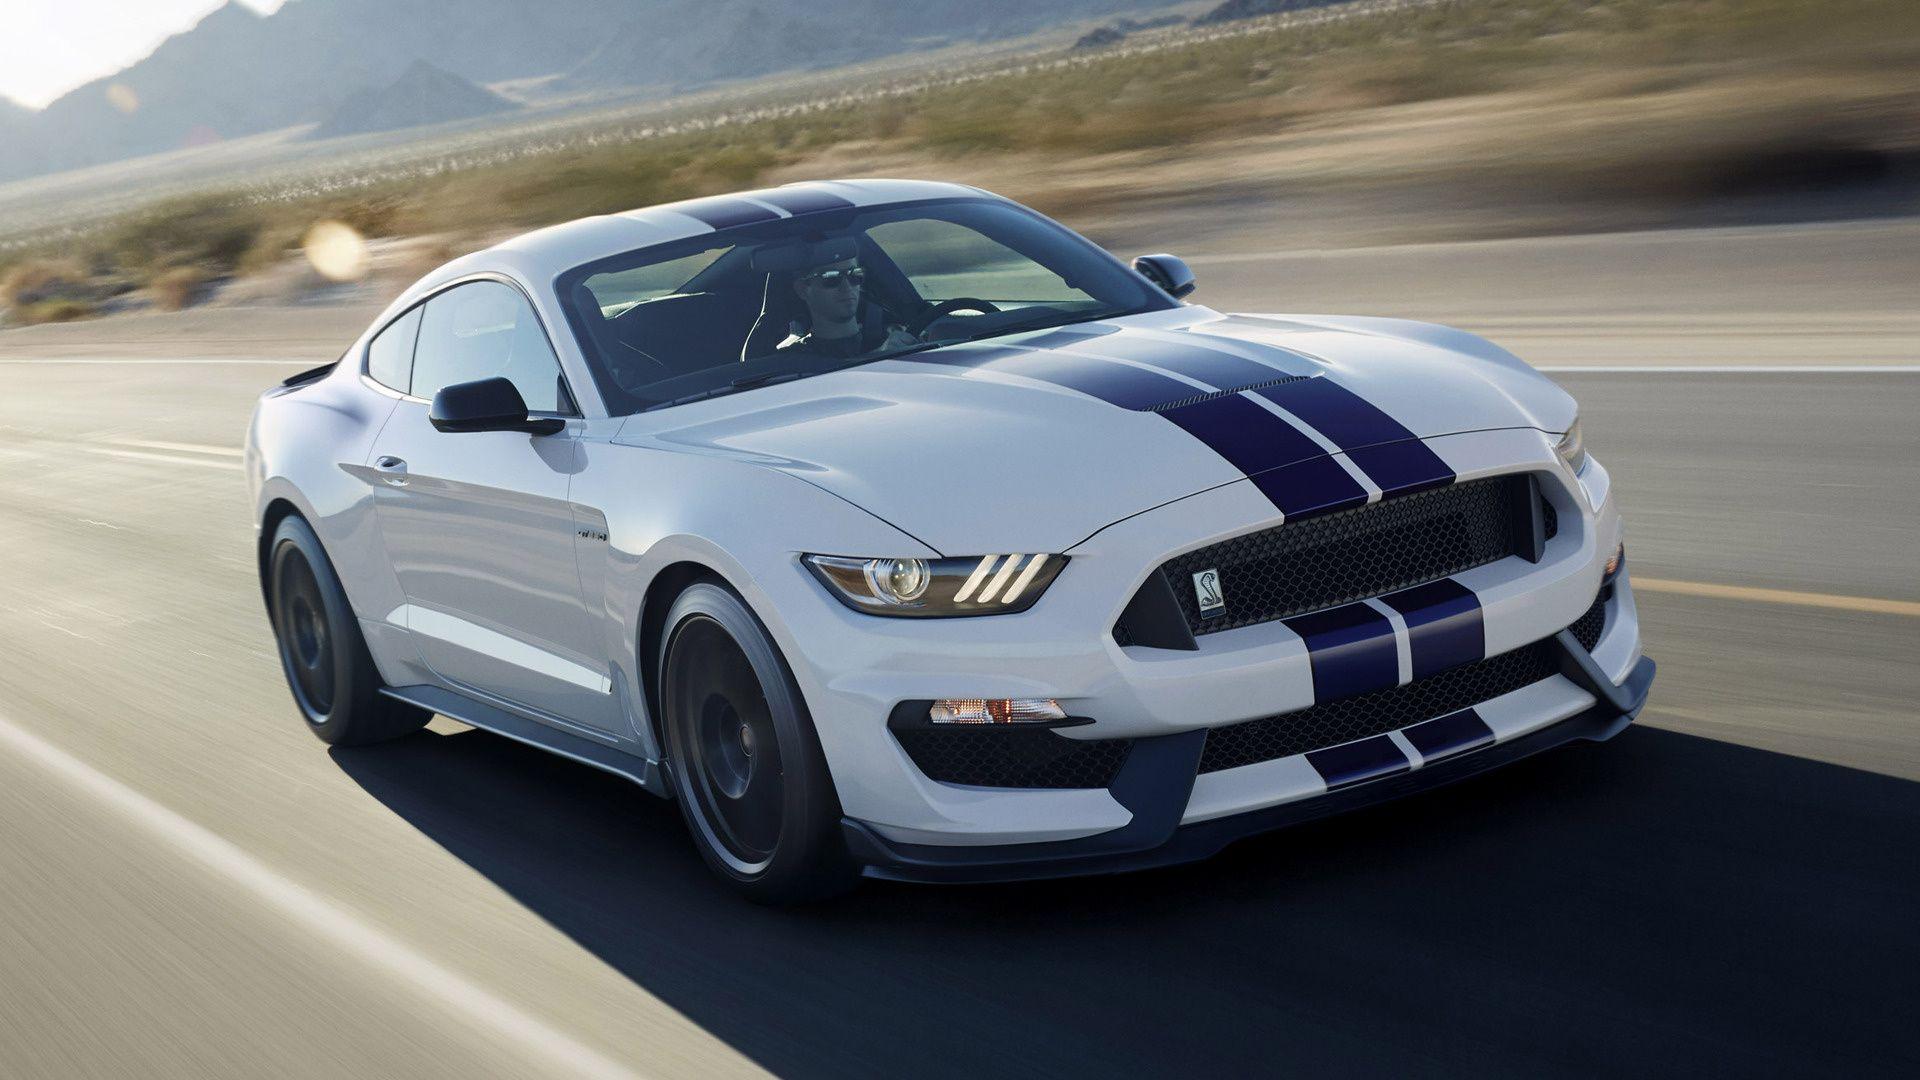 Ford Shelby Gt350 Wallpapers